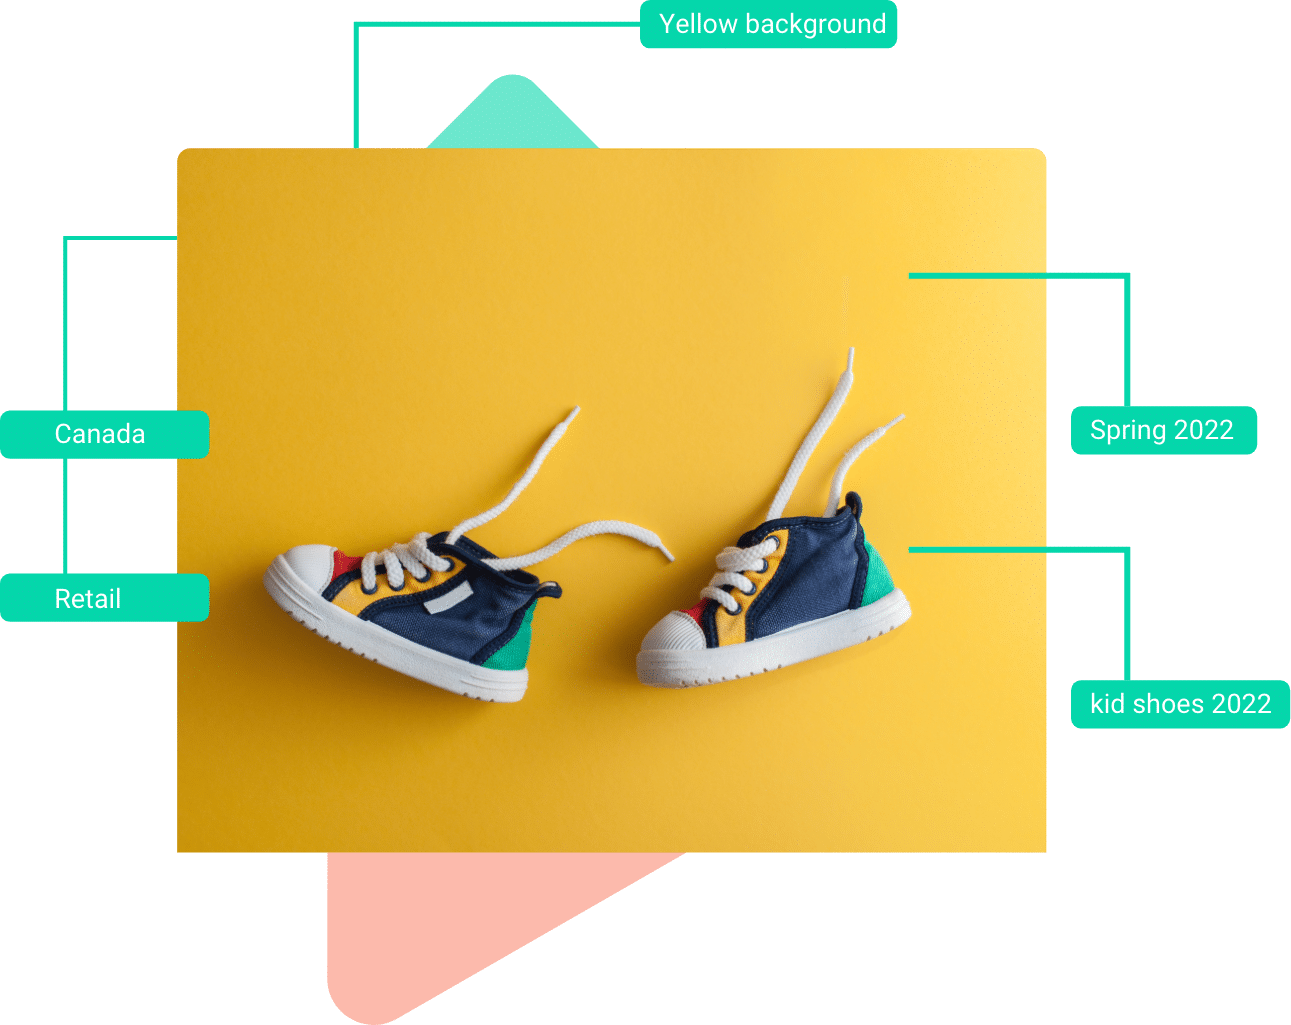 Picture of baby shoes on yellow background with descriptive metadata